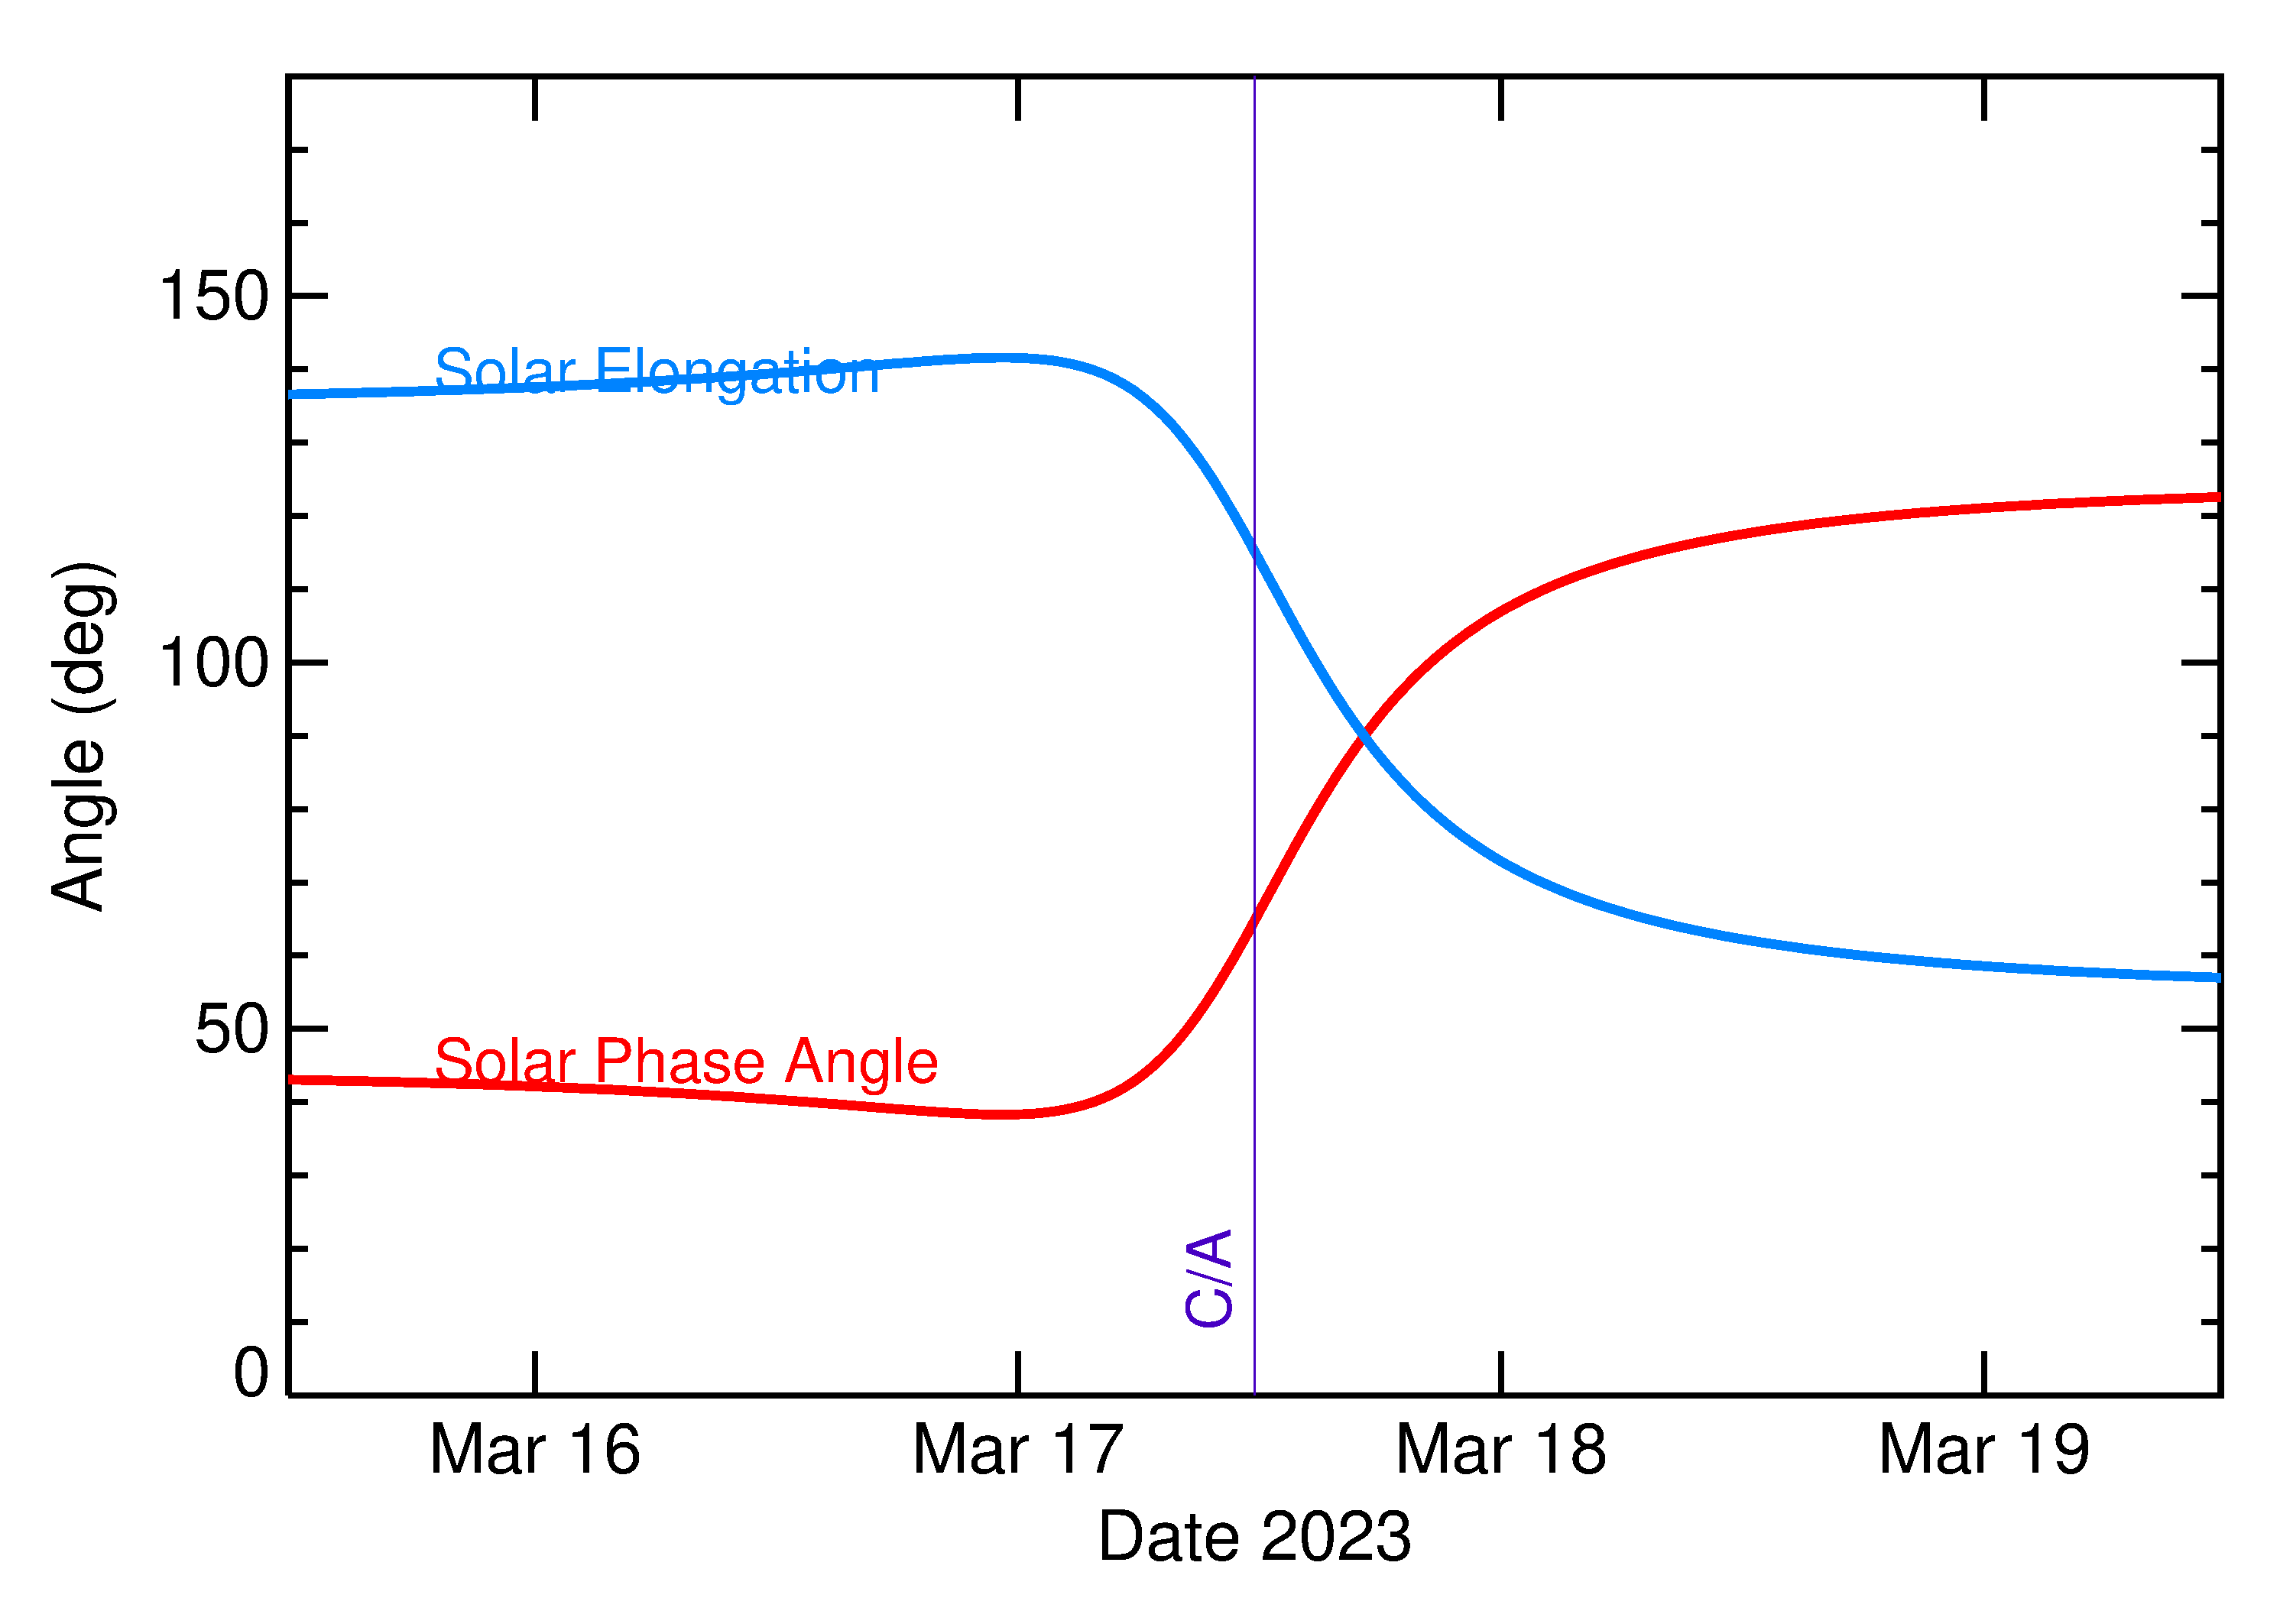 Solar Elongation and Solar Phase Angle of 2023 EY in the days around closest approach